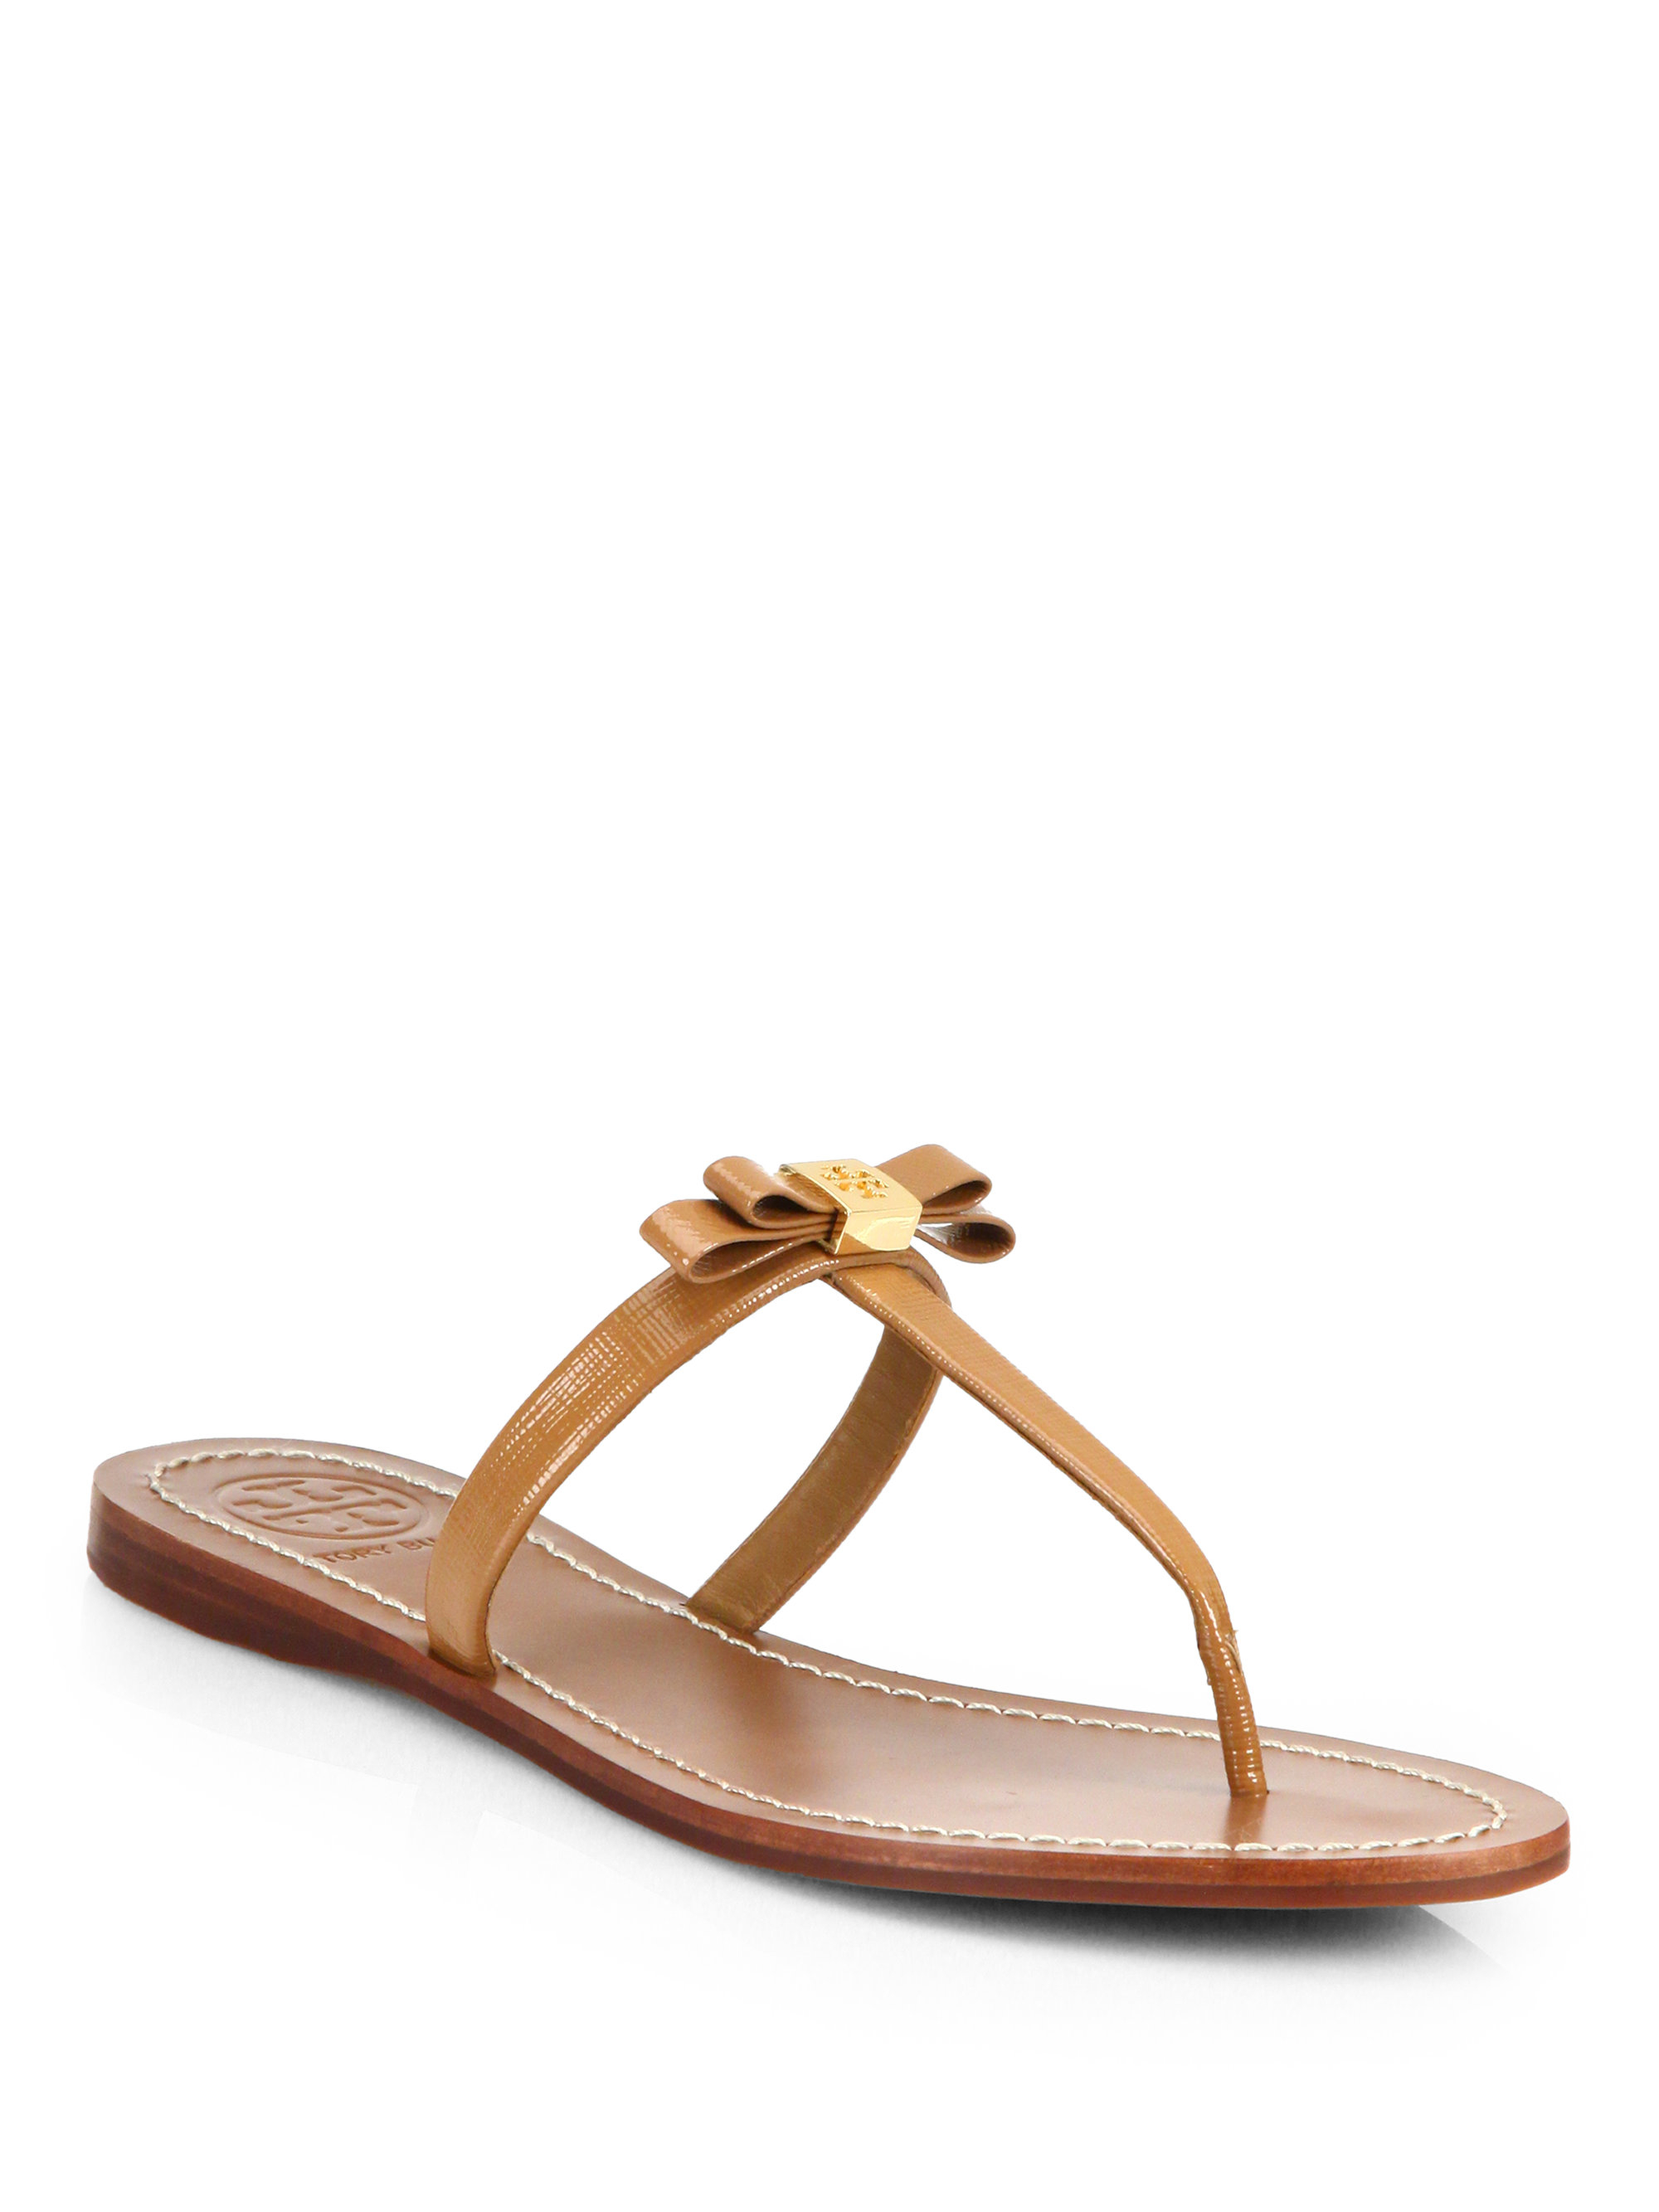 Lyst - Tory burch Leighanne Patent Saffiano Leather Bow Sandals in Brown